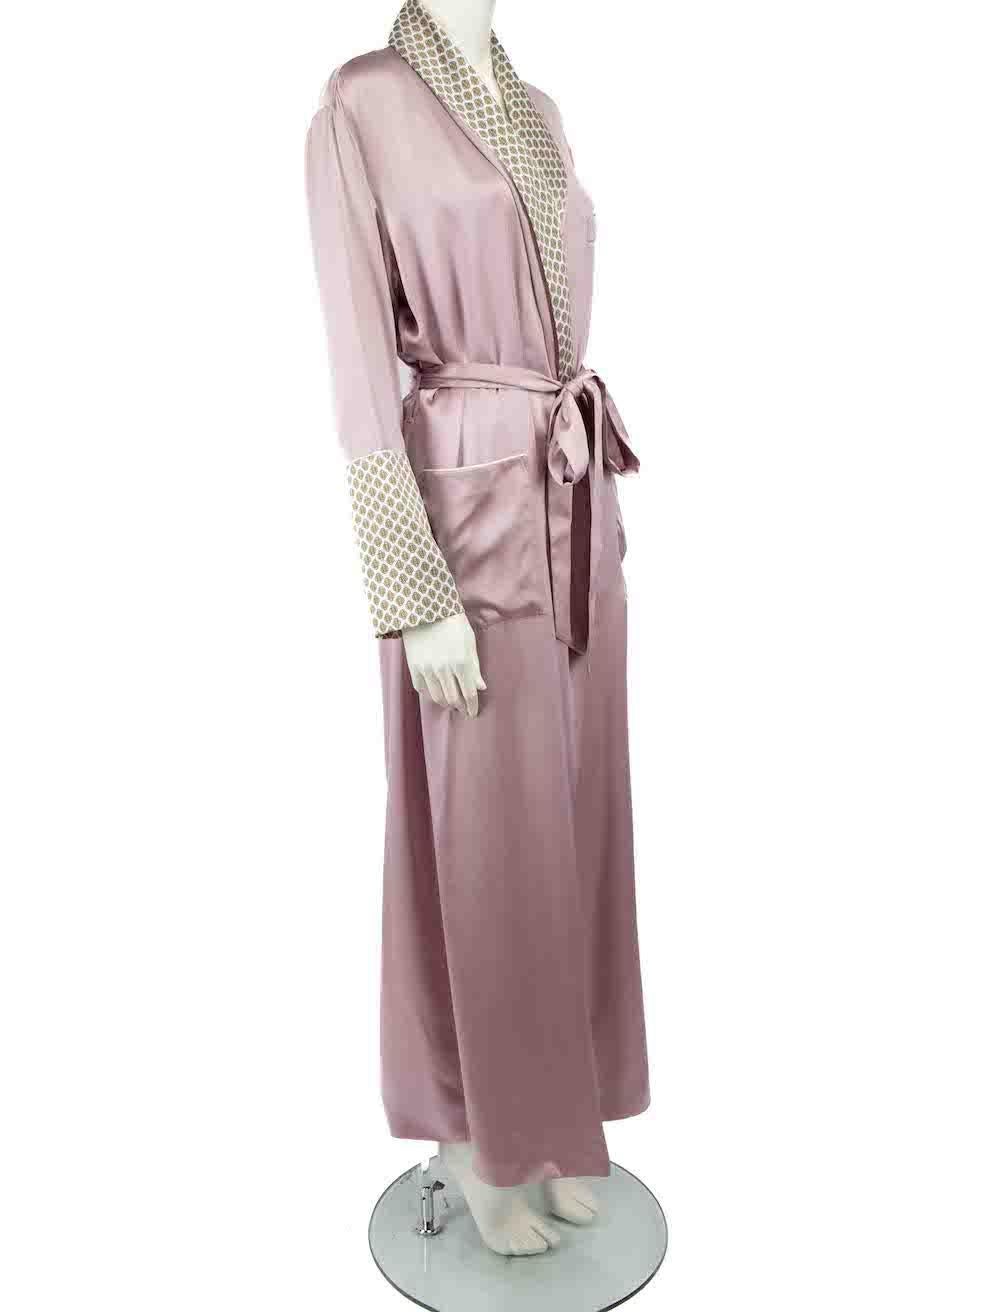 CONDITION is Good. General wear to robe is evident. Moderate signs of wear to the front and back with discoloured marks and small plucks to the weave on this used Olivia Von Halle designer resale item.
 
 Details
 Lilac
 Silk
 Dressing gown
